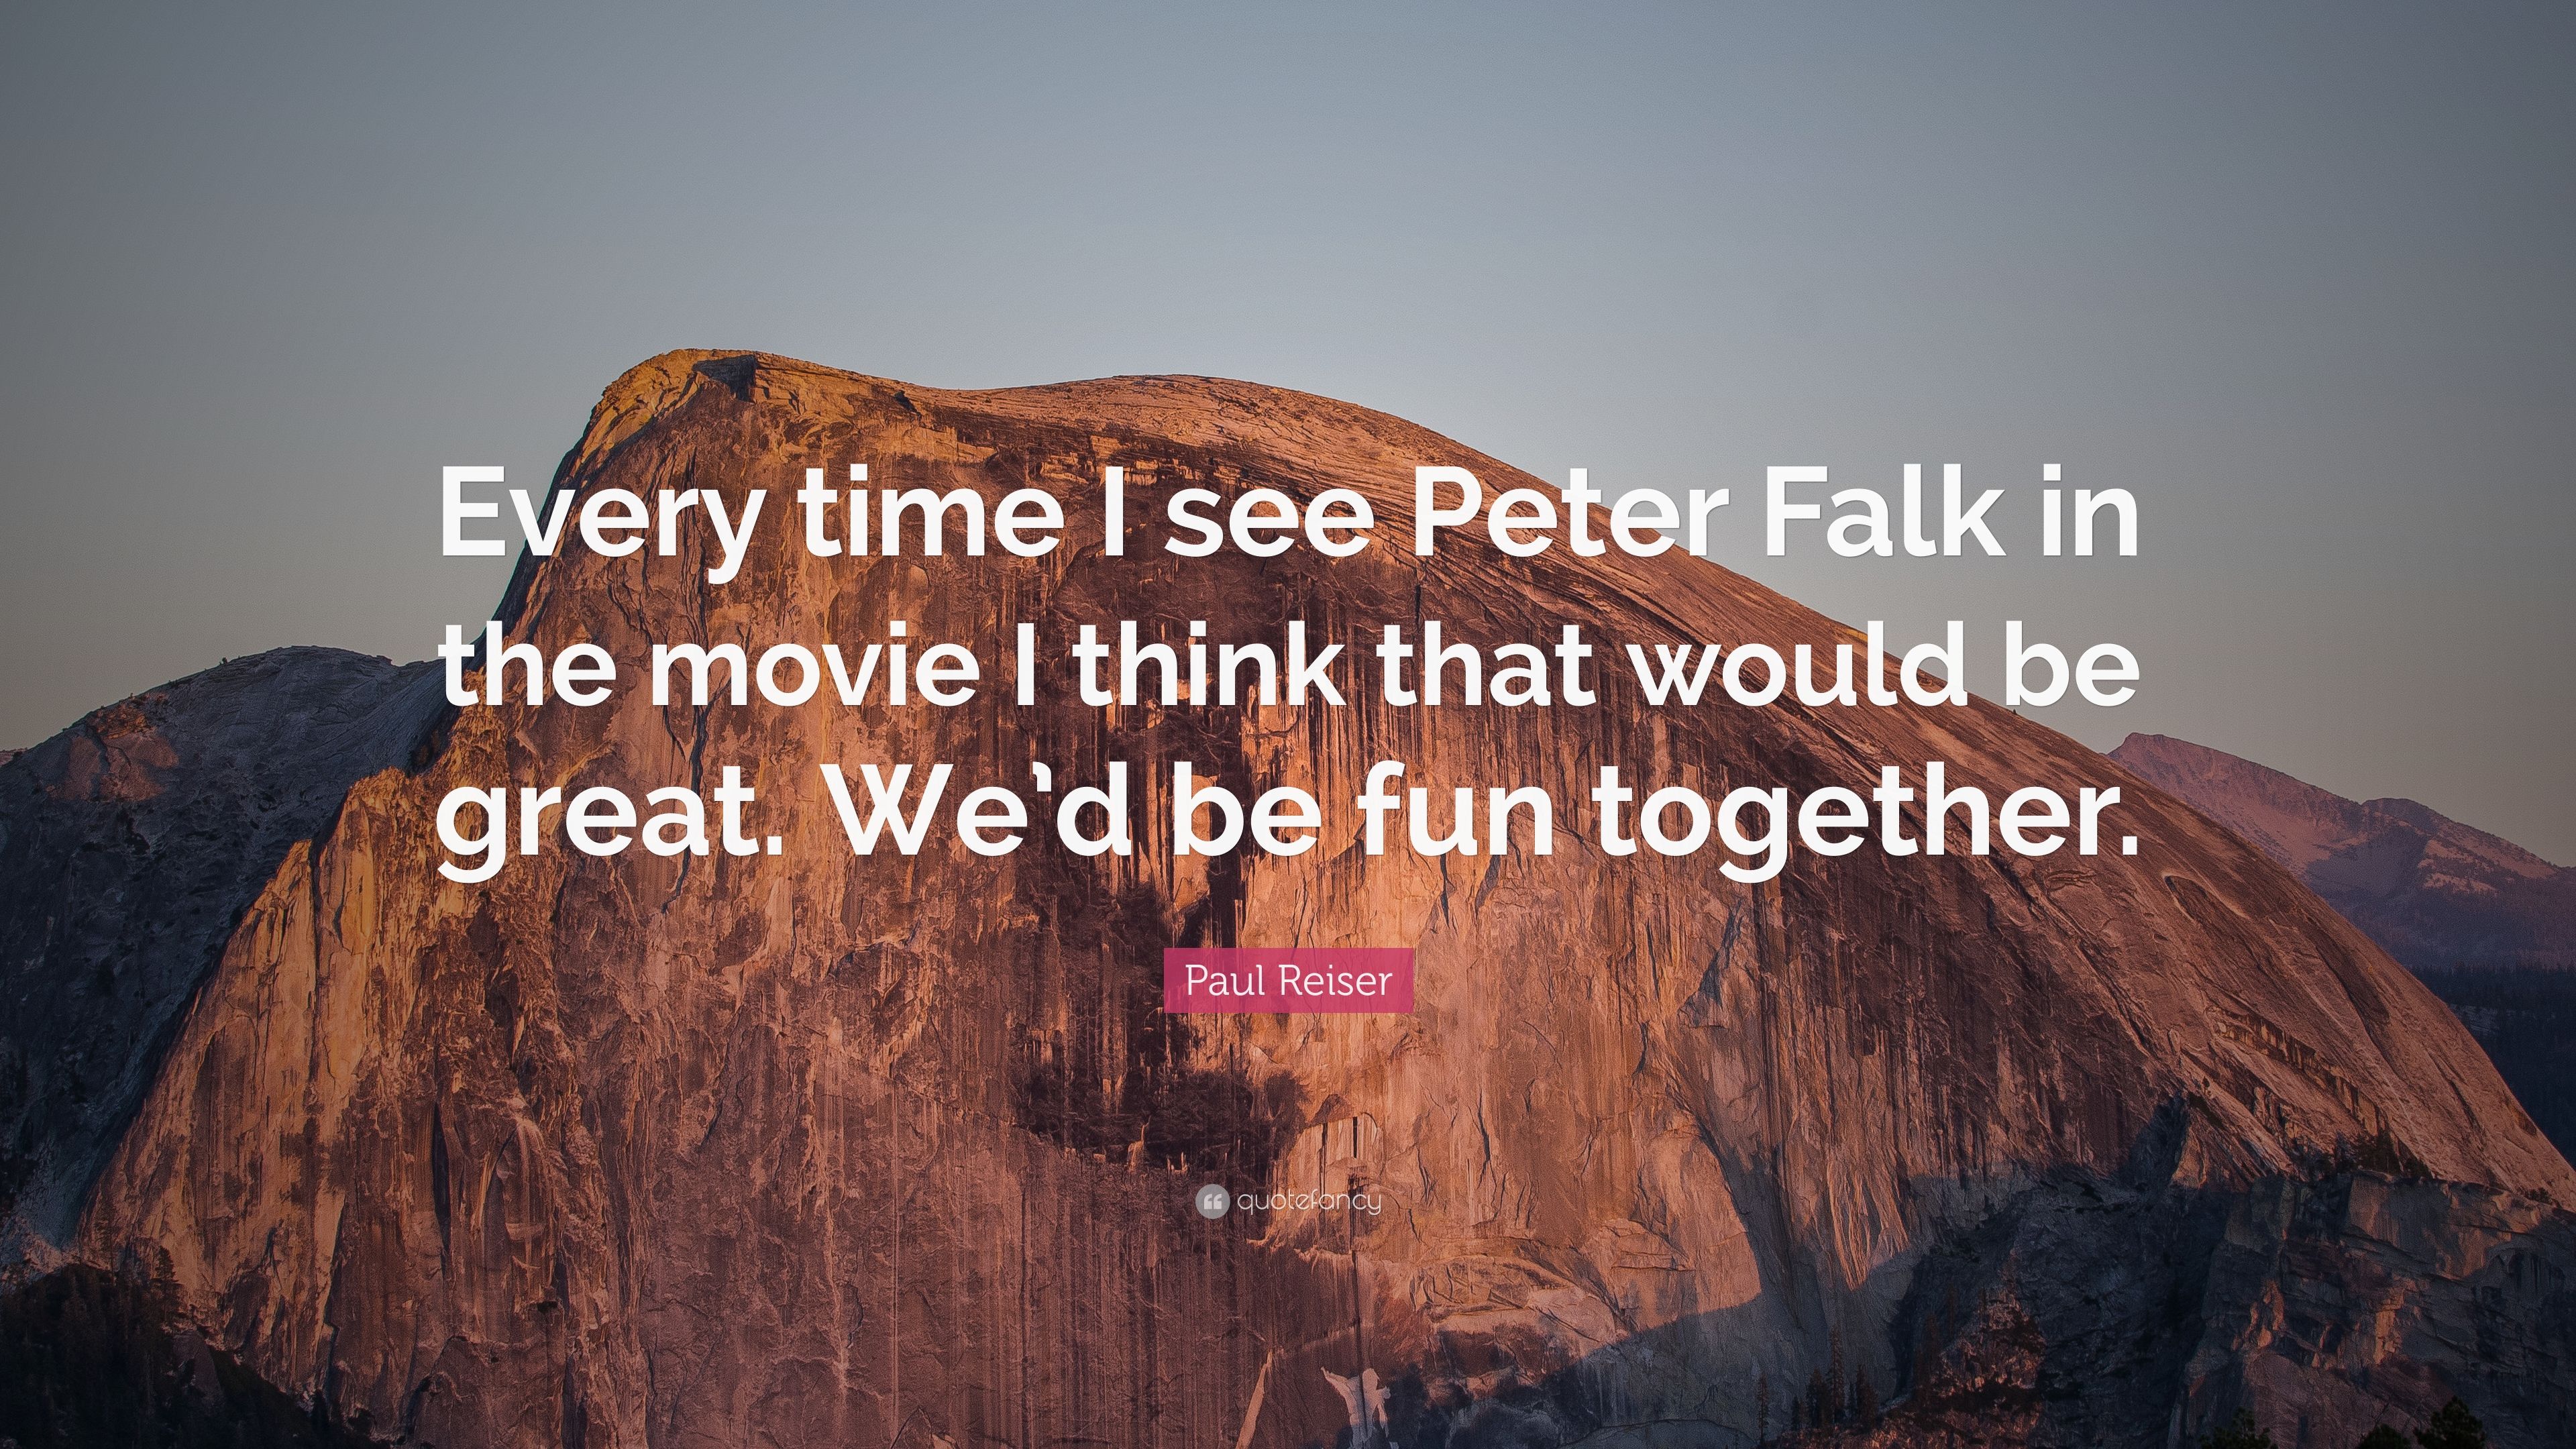 Paul Reiser Quote: “Every time I see Peter Falk in the movie I